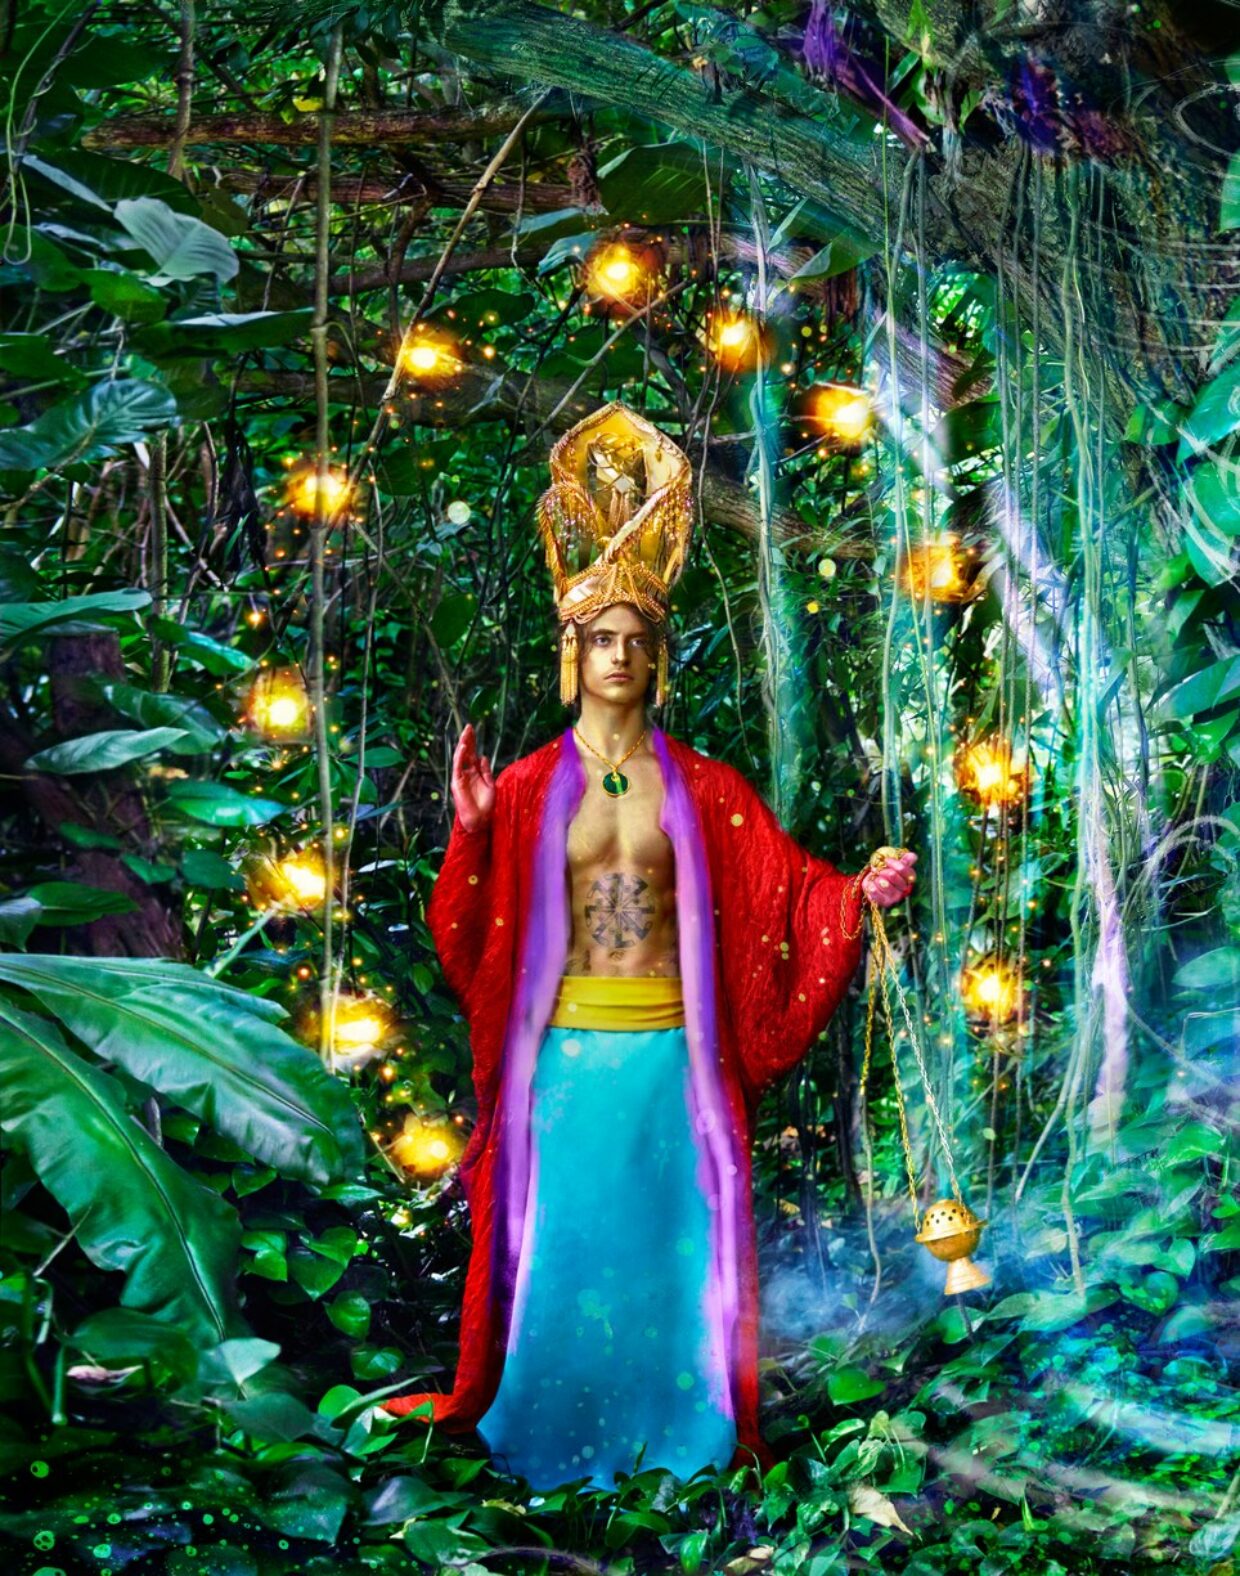 What Can David LaChapelle’s Celebrity-Fuelled Fantasias Tell Us Now? | 6